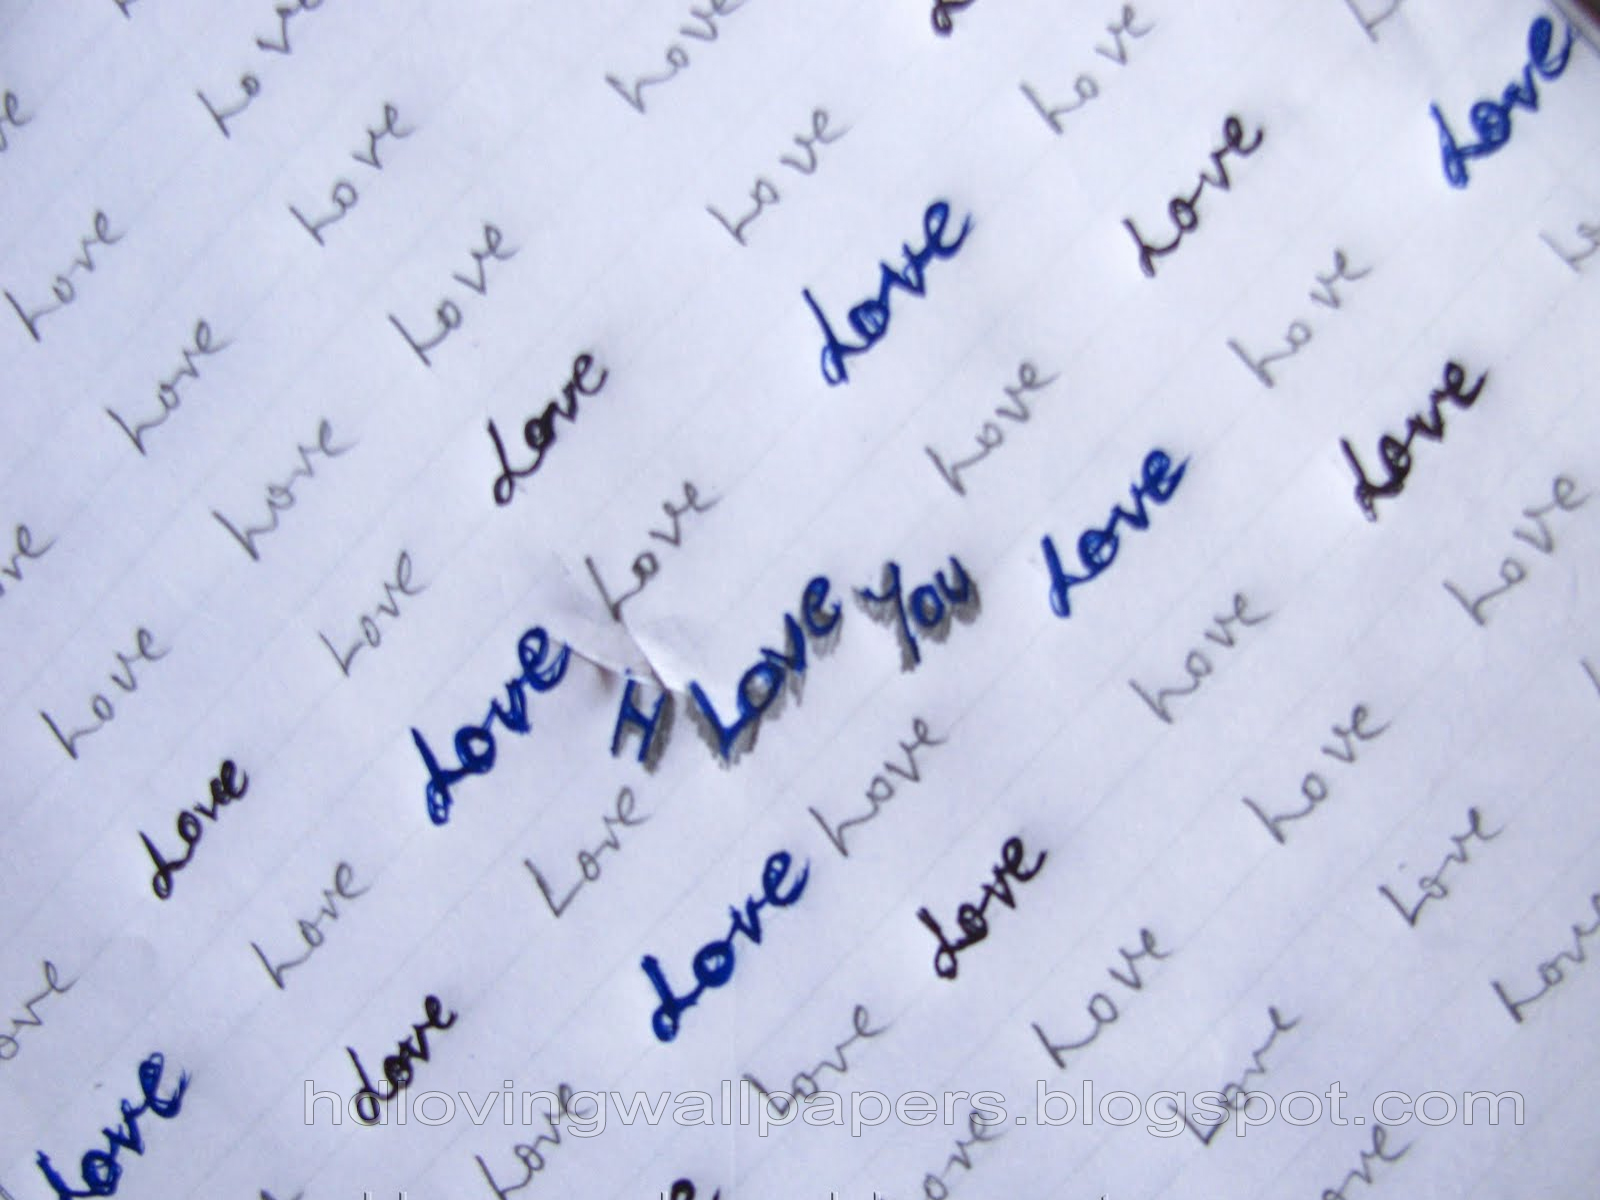 Love Wallpaper Sad Quote   love quotes wallpapers hd loving